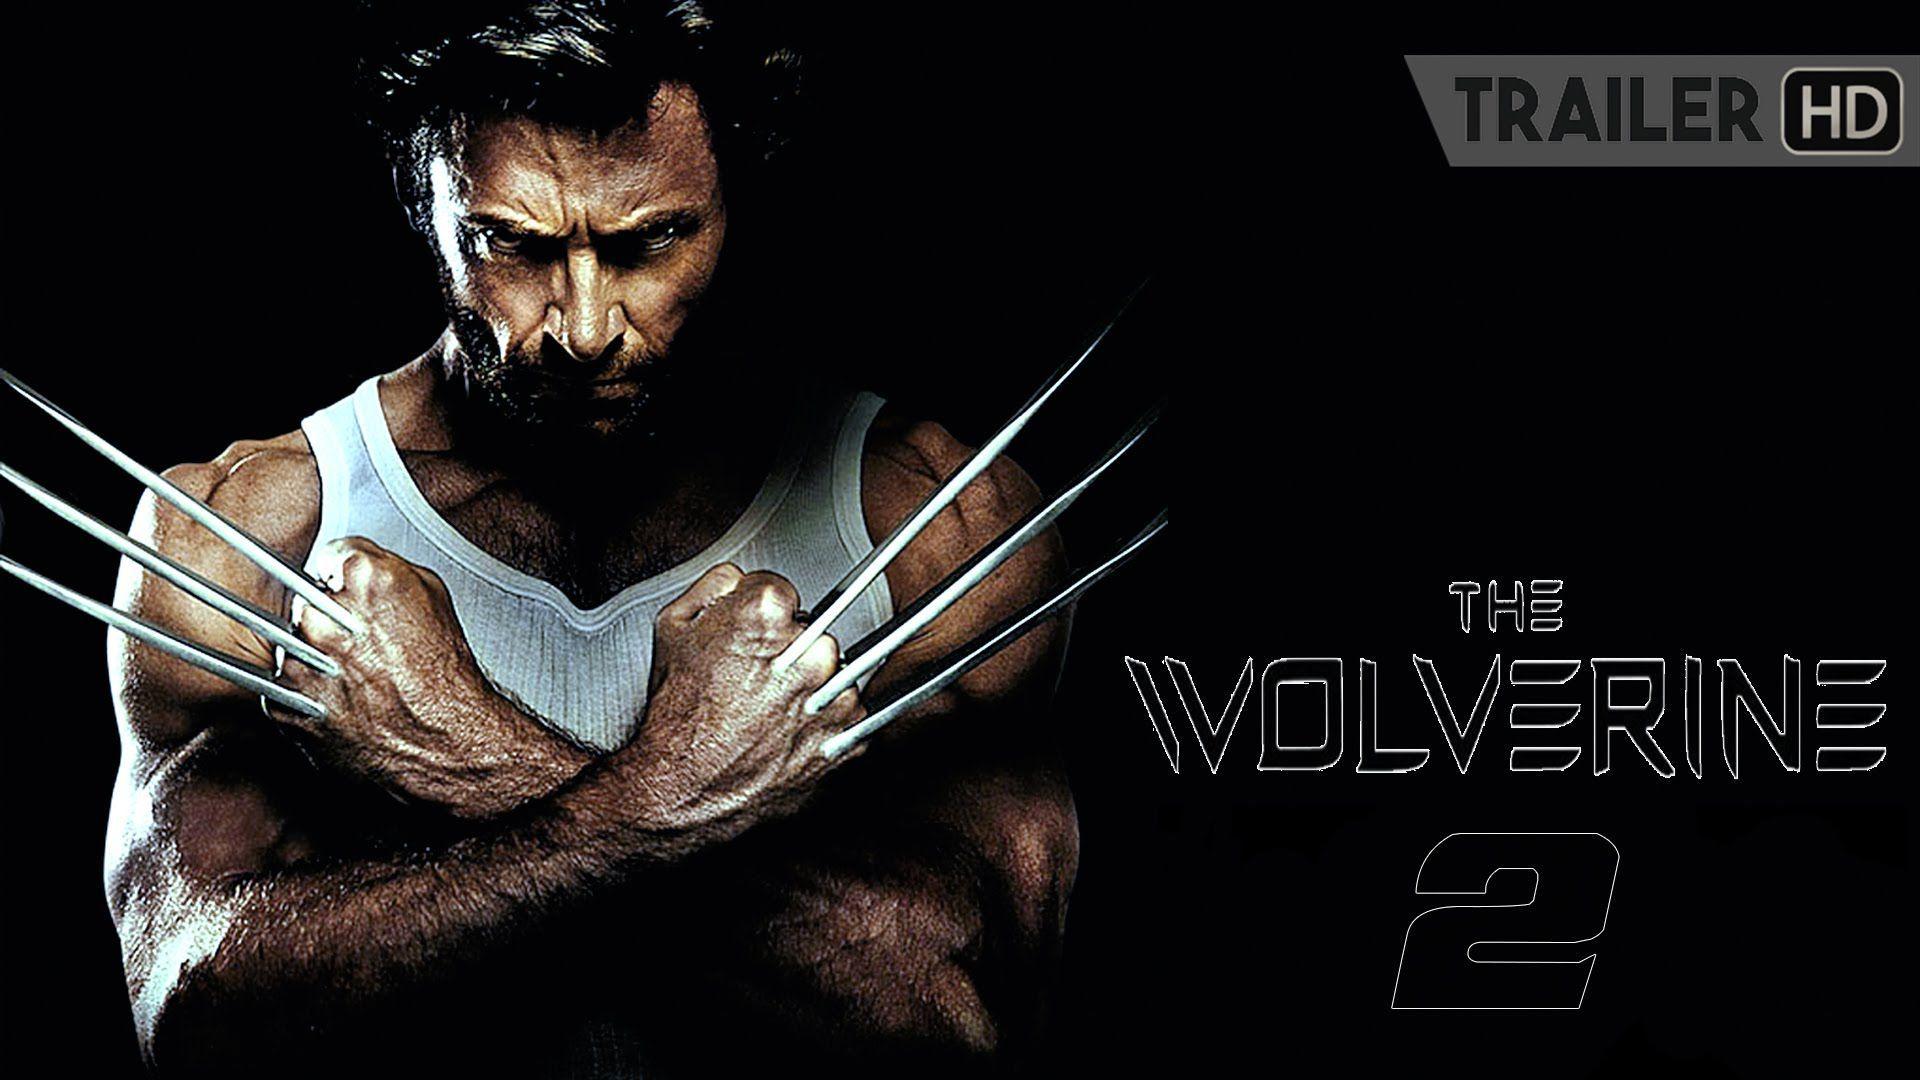 The Wolverine 2 2017 HD